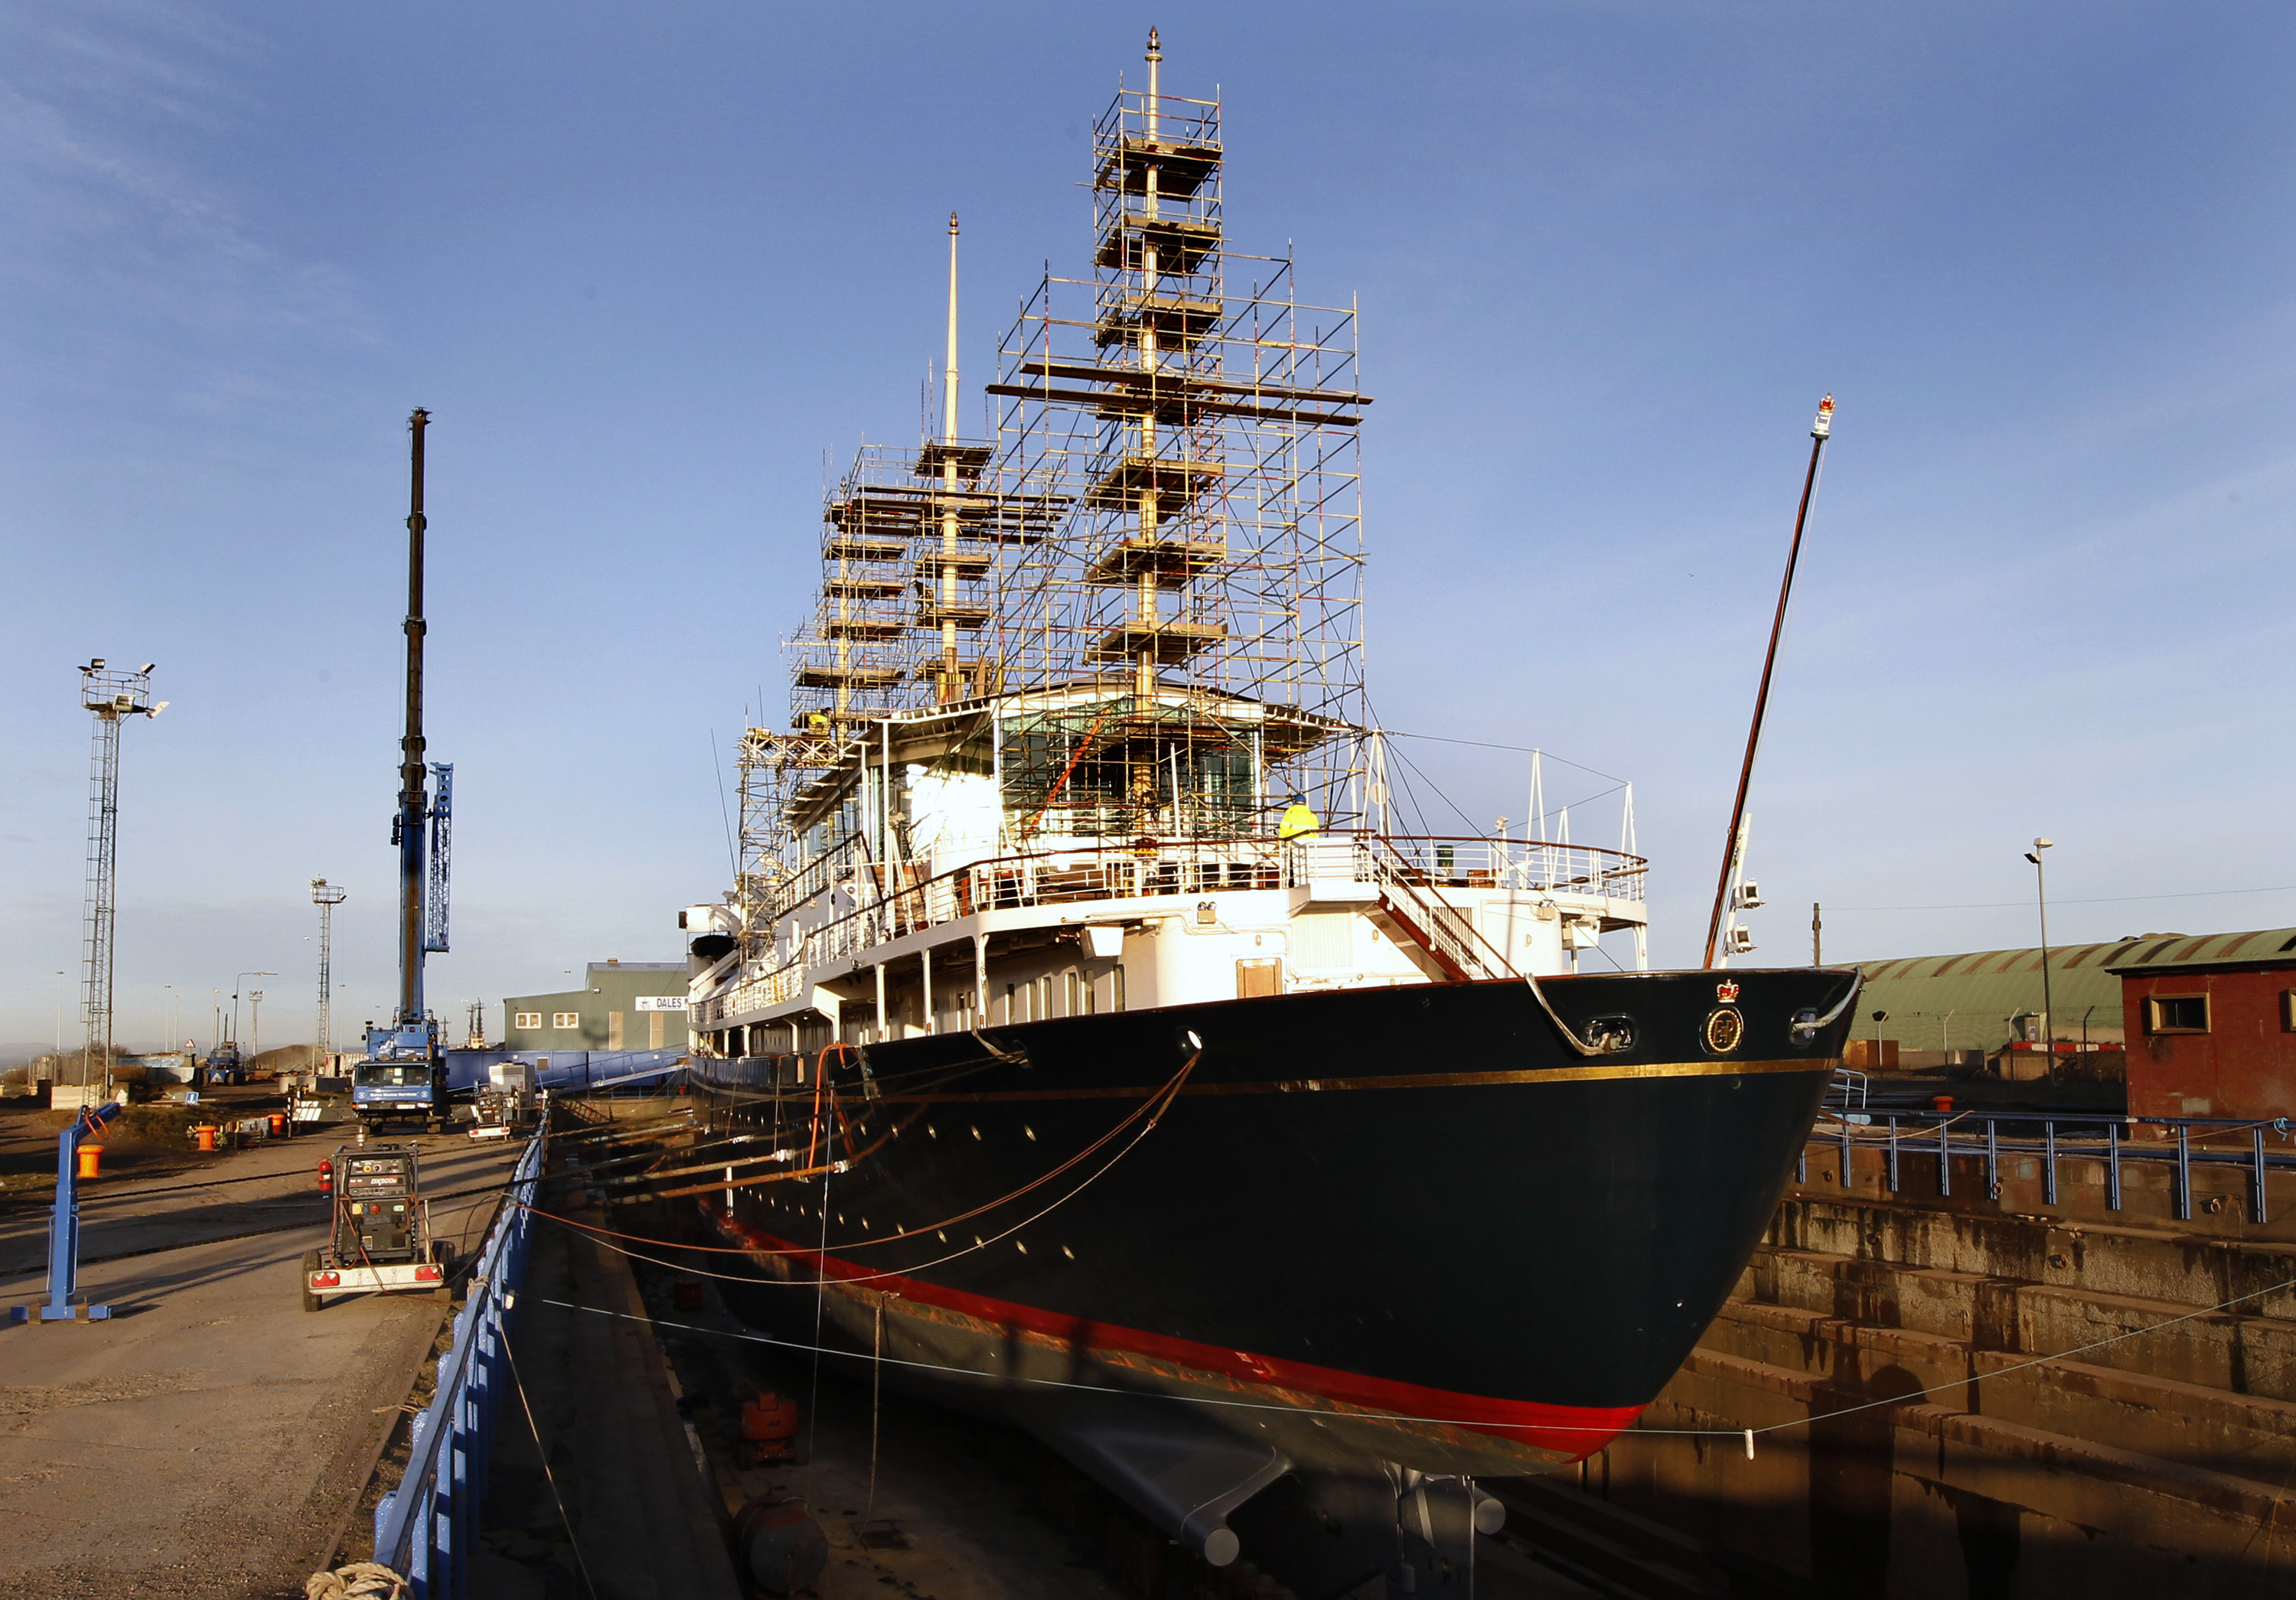 The Royal Yacht Britannia is seen as it sits in a dry dock at Forth Ports in Edinburgh